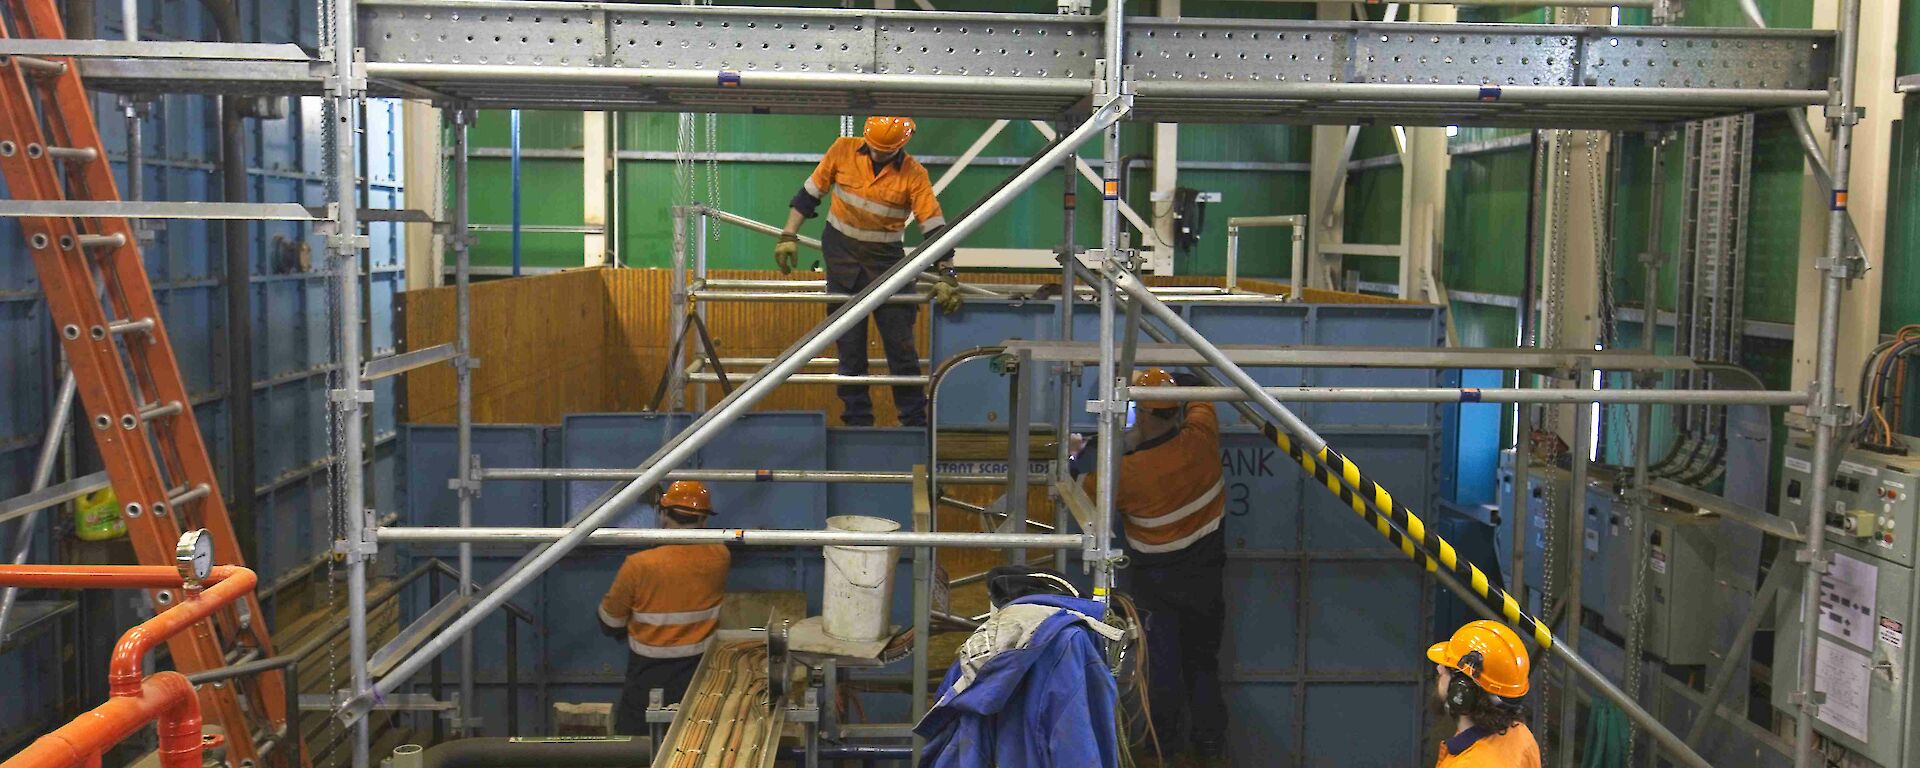 Four expeditioners work on some scaffolding wearing hard hats and hi vis gear